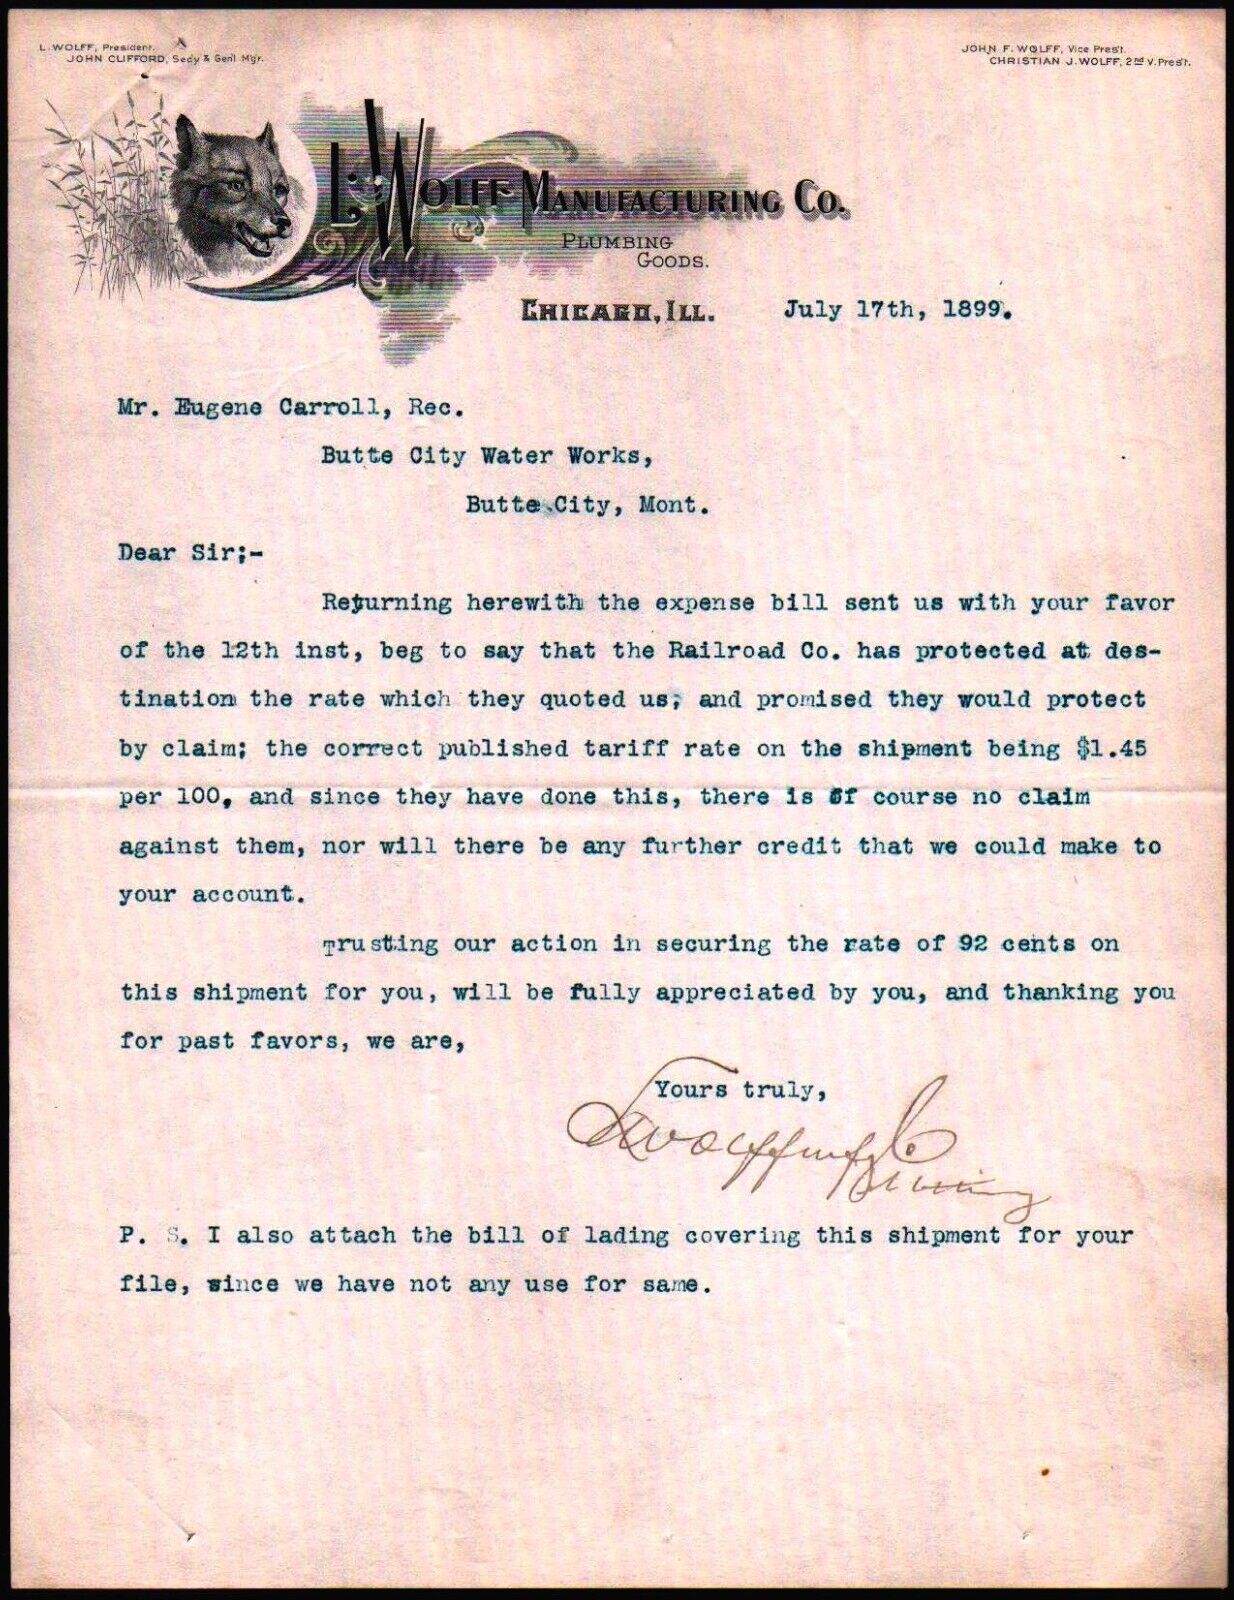 1899 Chicago - L Wolff Manufacturing Co - Plumbing Goods - Rare Letter Head Bill